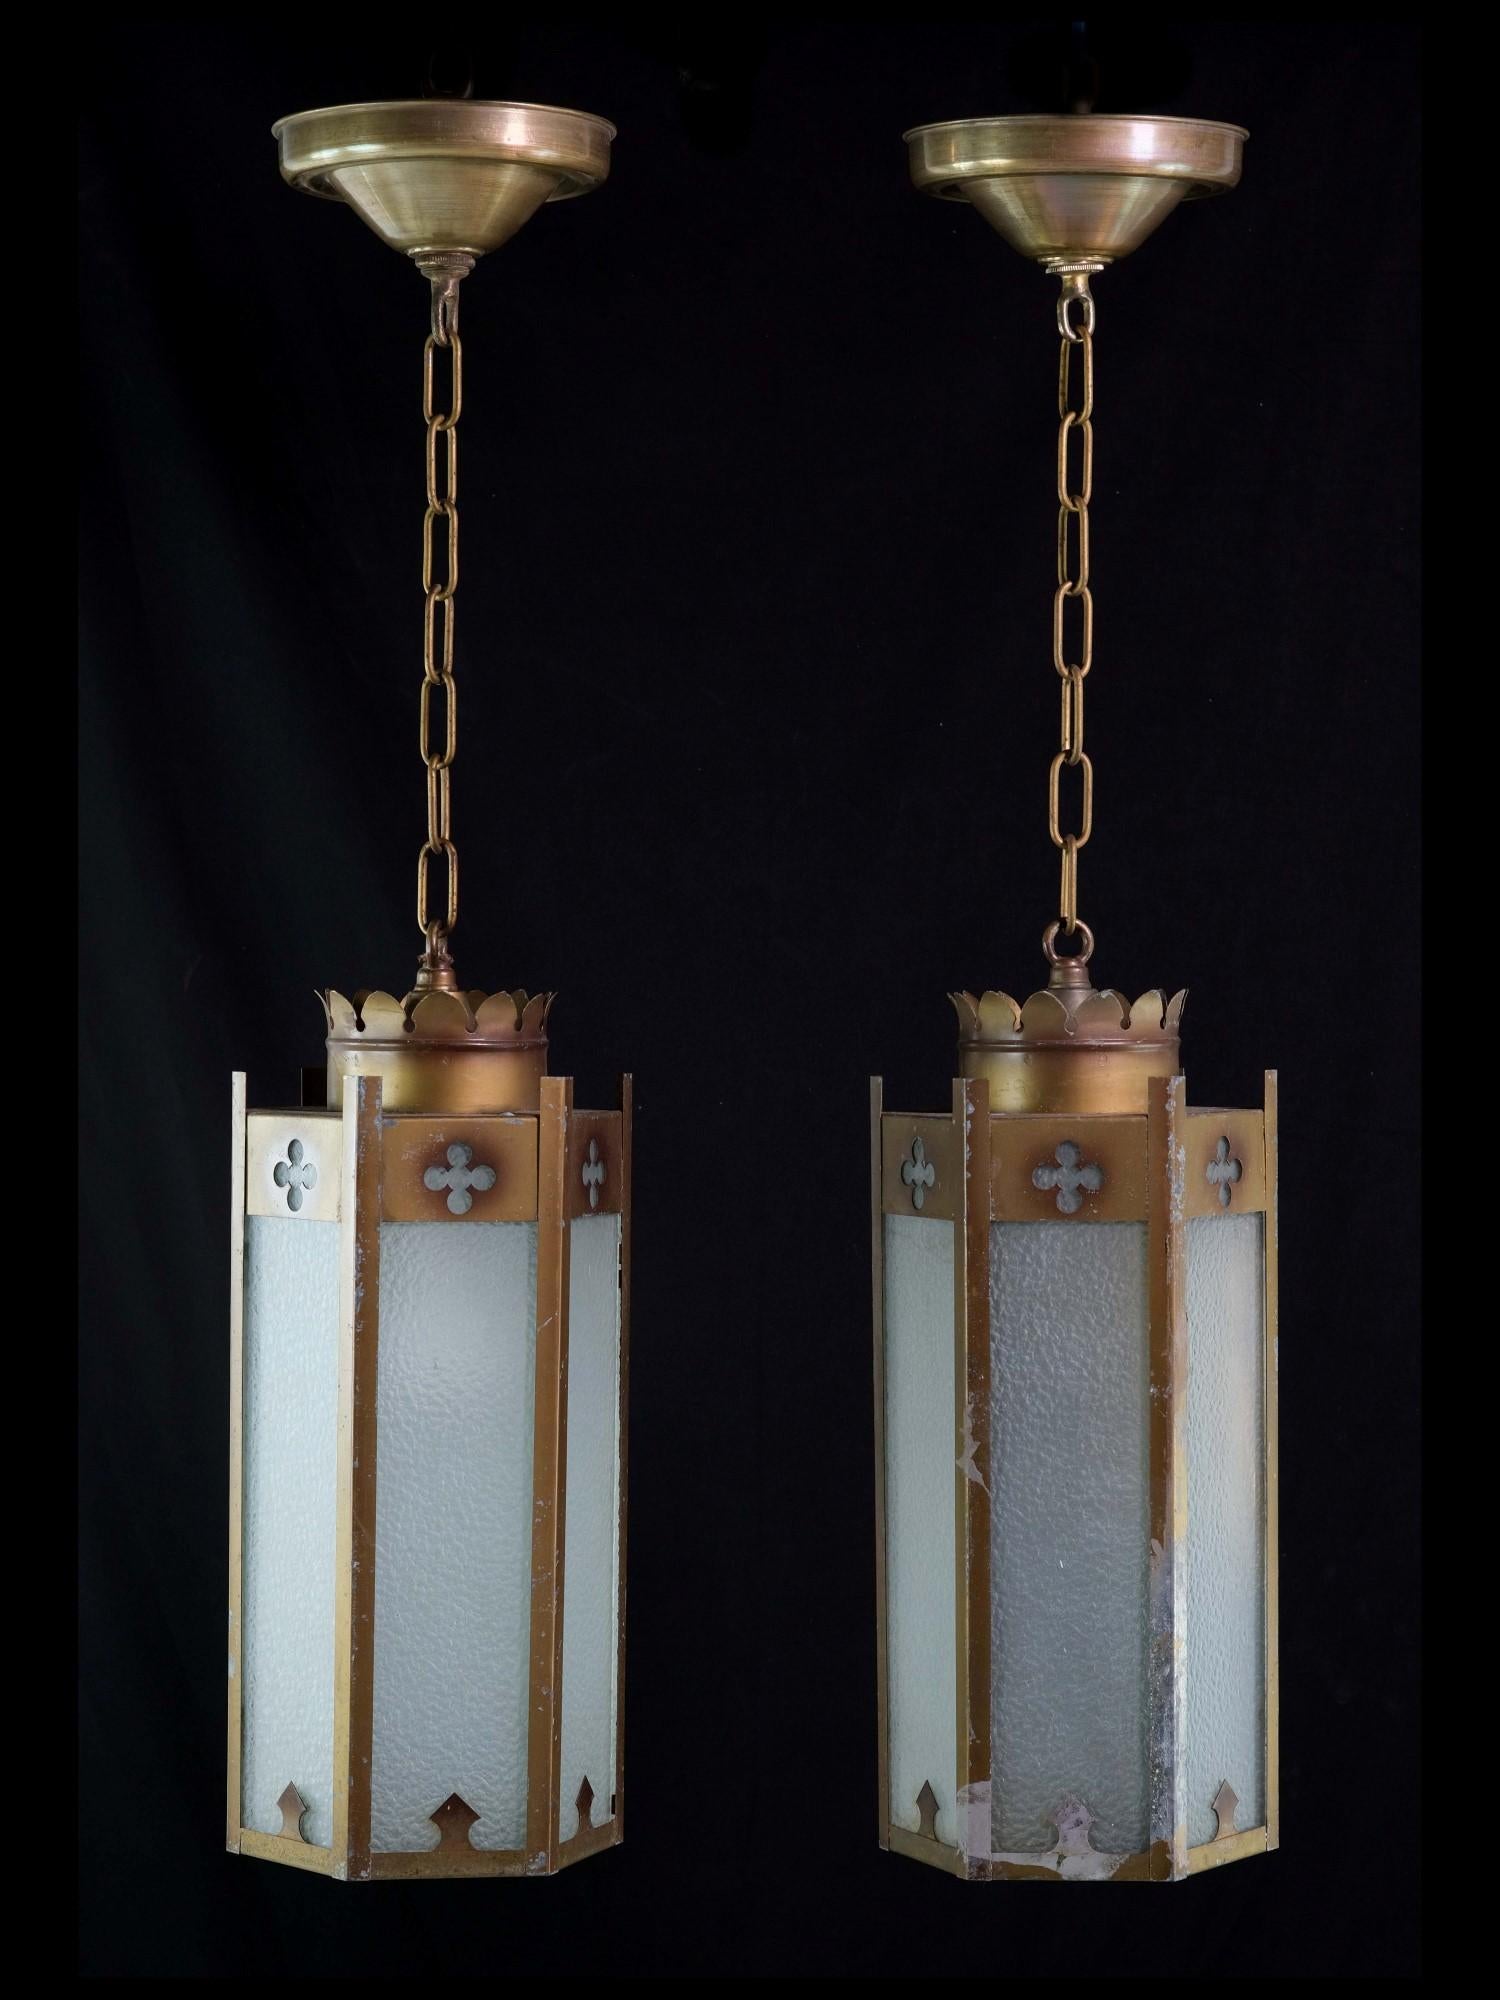 1950's Gothic style pendant lights with textured white glass. This pair of hexagon shaped steel lights with brass plating have the original patina although there some wear with the brass (see pictures). Priced as a pair. This can be seen at our 400